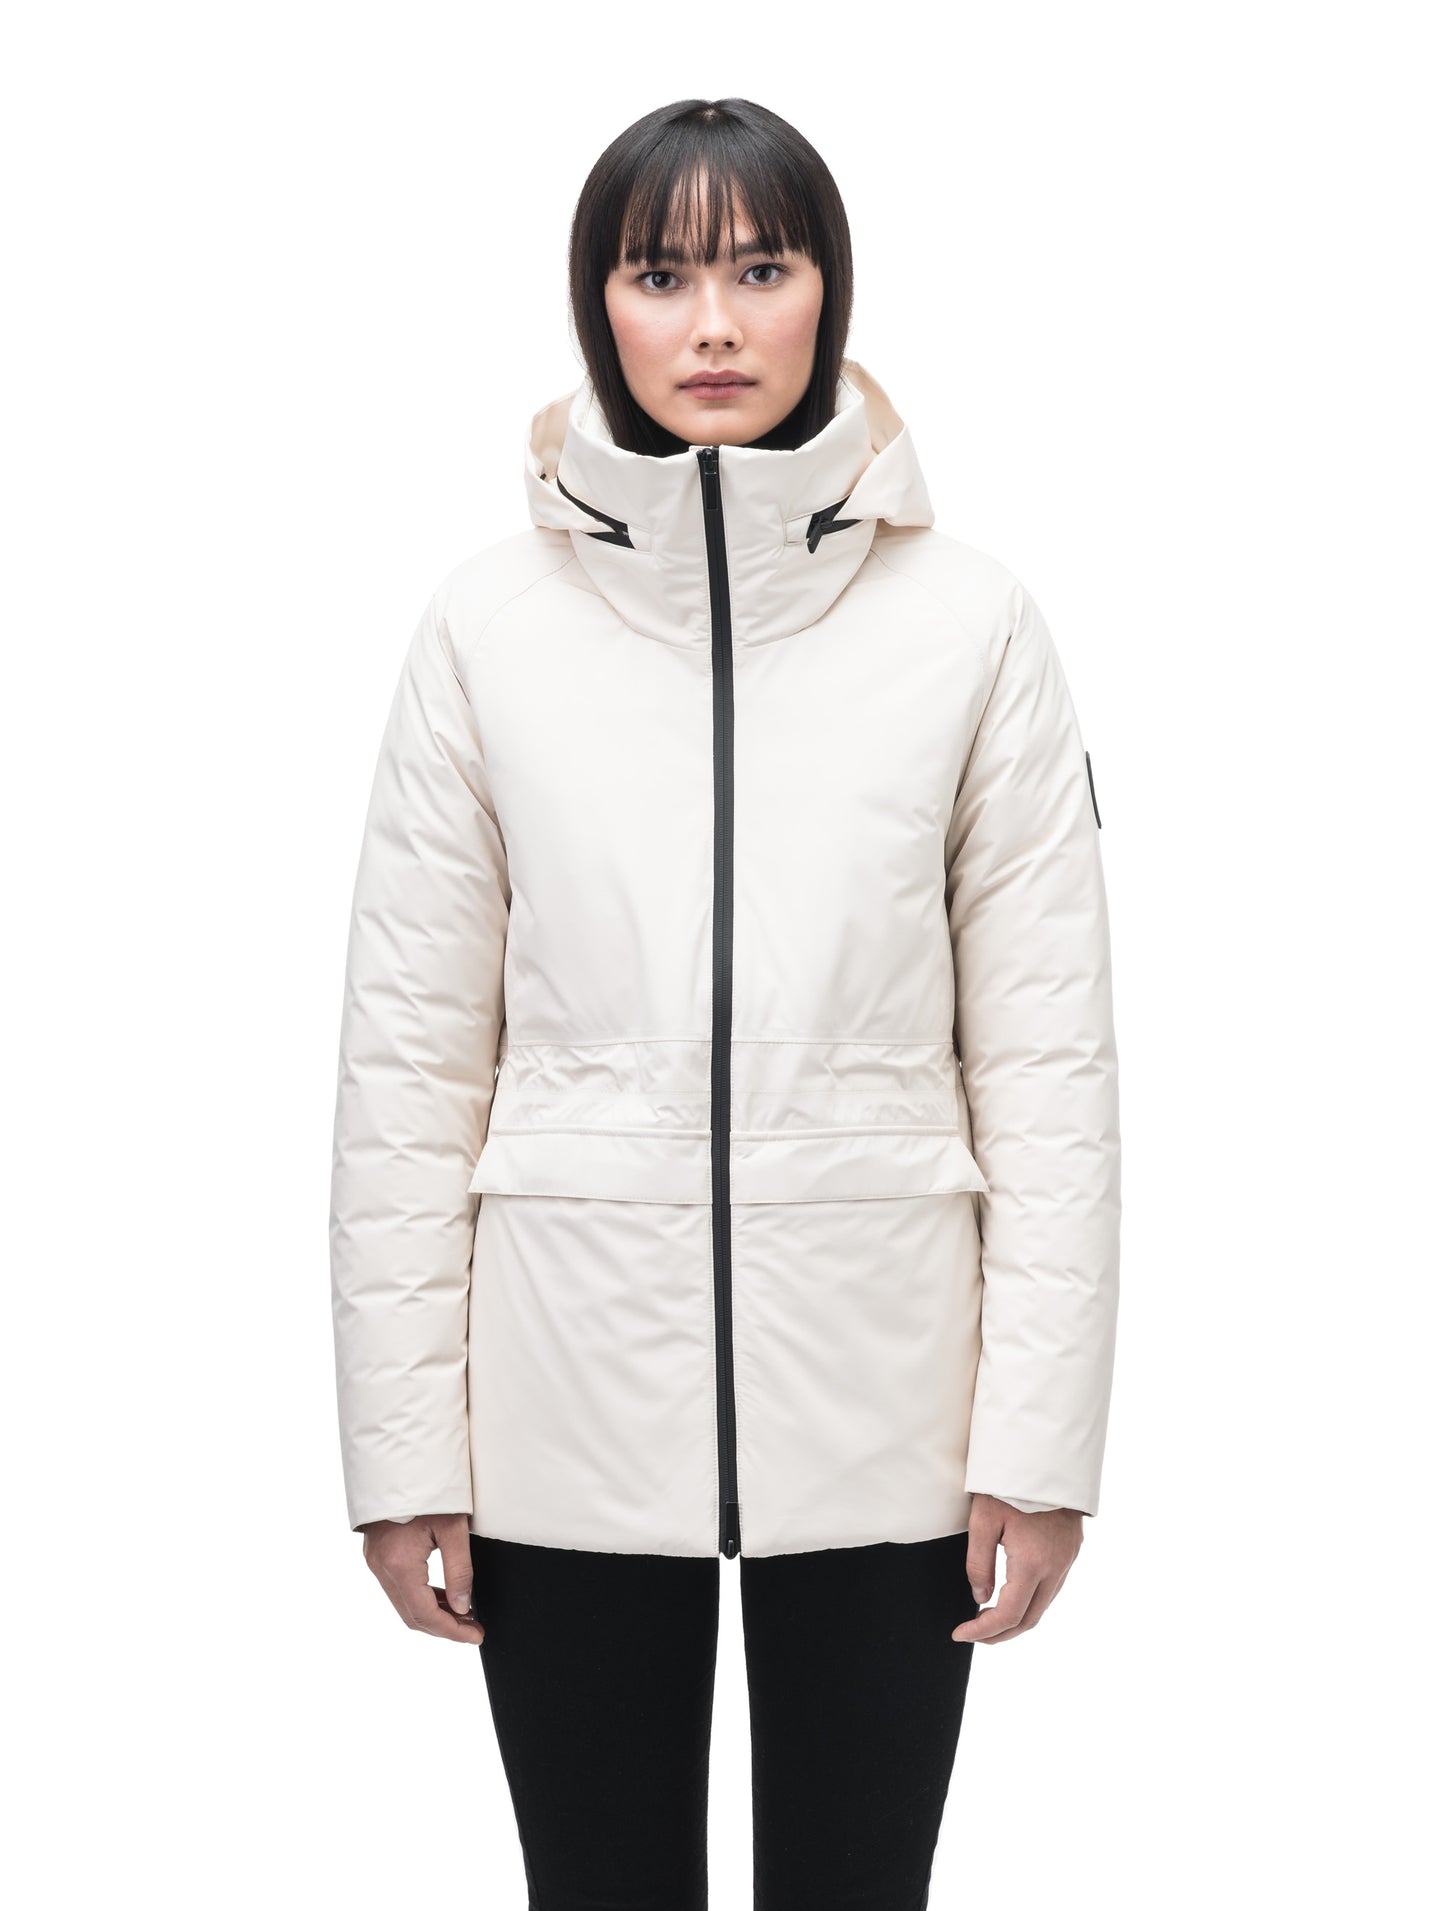 Litho Ladies Short Parka in hip length, Canadian duck down insulation, tuckable waterproof hood, and two-way zipper, in Wheat